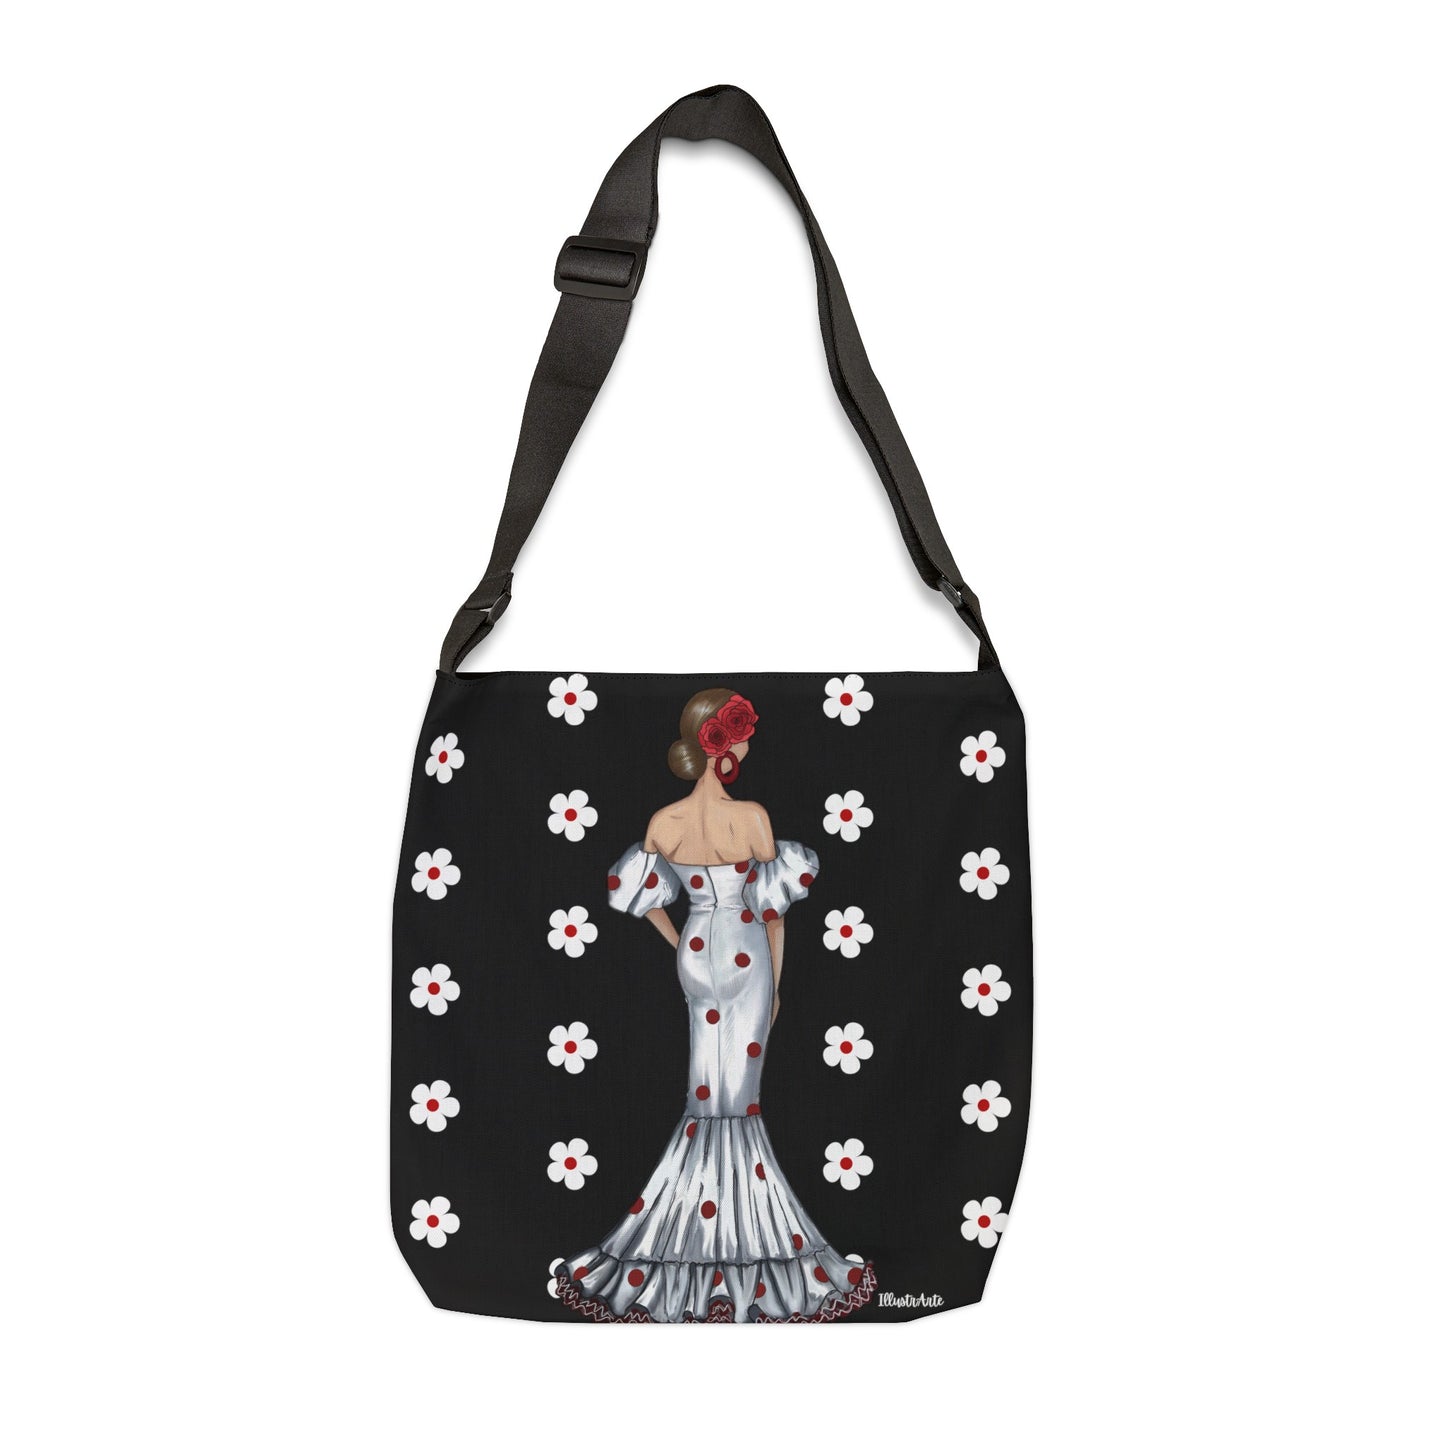 Flamenco Dancer Tote Bag with adjustable straps, flamenco dancer Maite with red/orange background and flowers